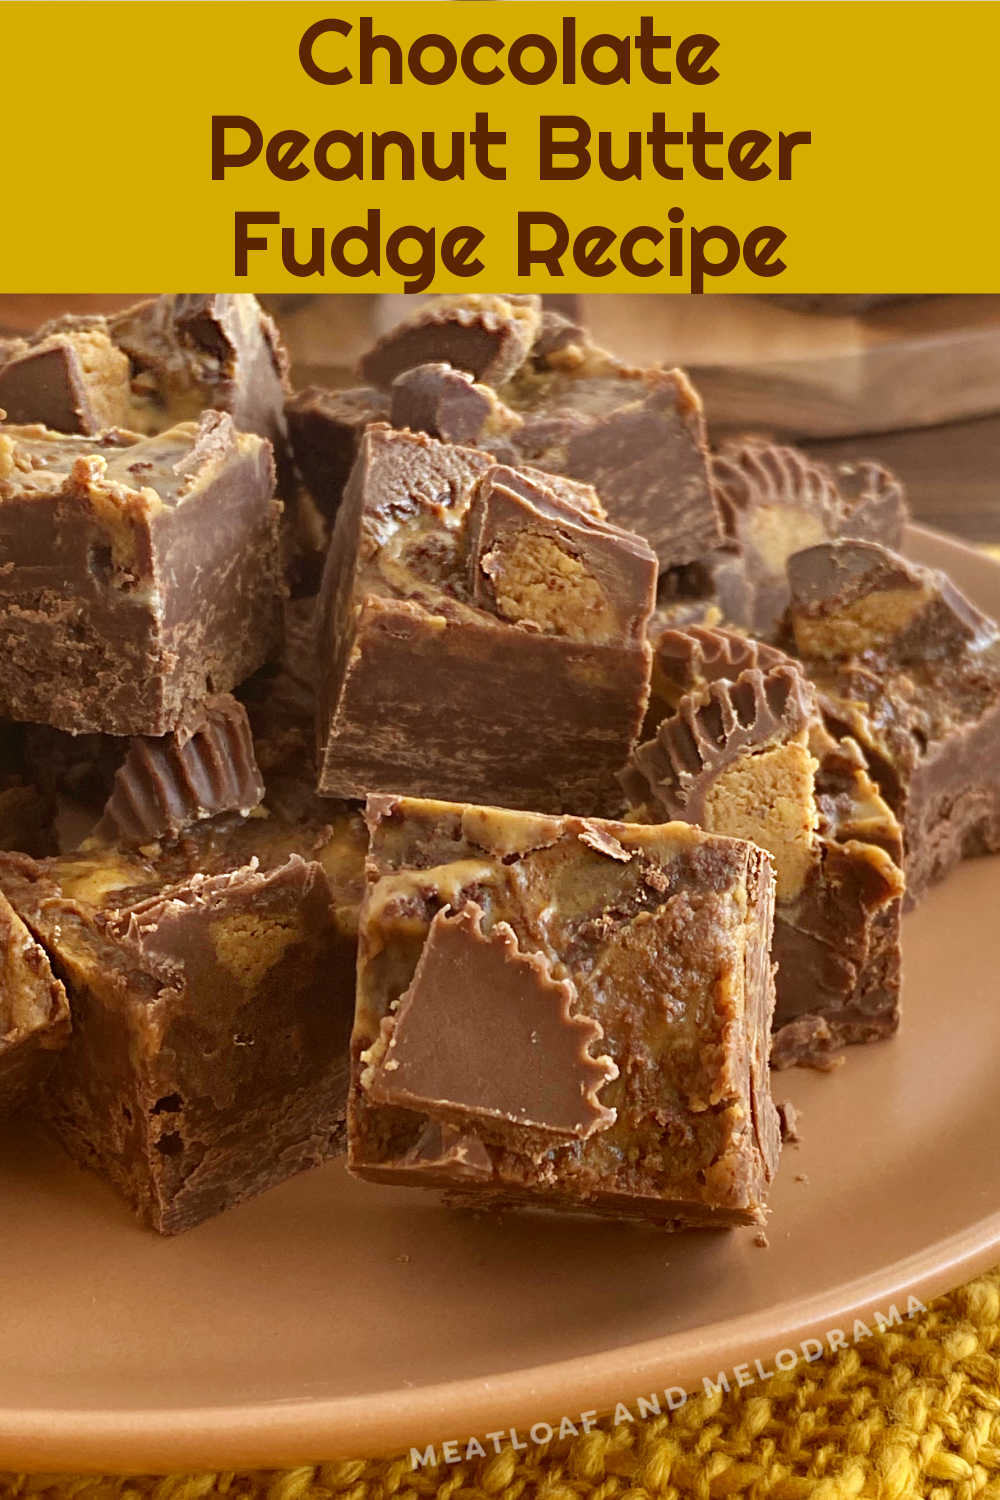 Learn how to make Chocolate Peanut Butter Fudge with Reese's Peanut butter cups and a few simple ingredients using this easy fudge recipe. This homemade fudge is smooth, creamy and perfect for the holidays or anytime you want a sweet treat! via @meamel